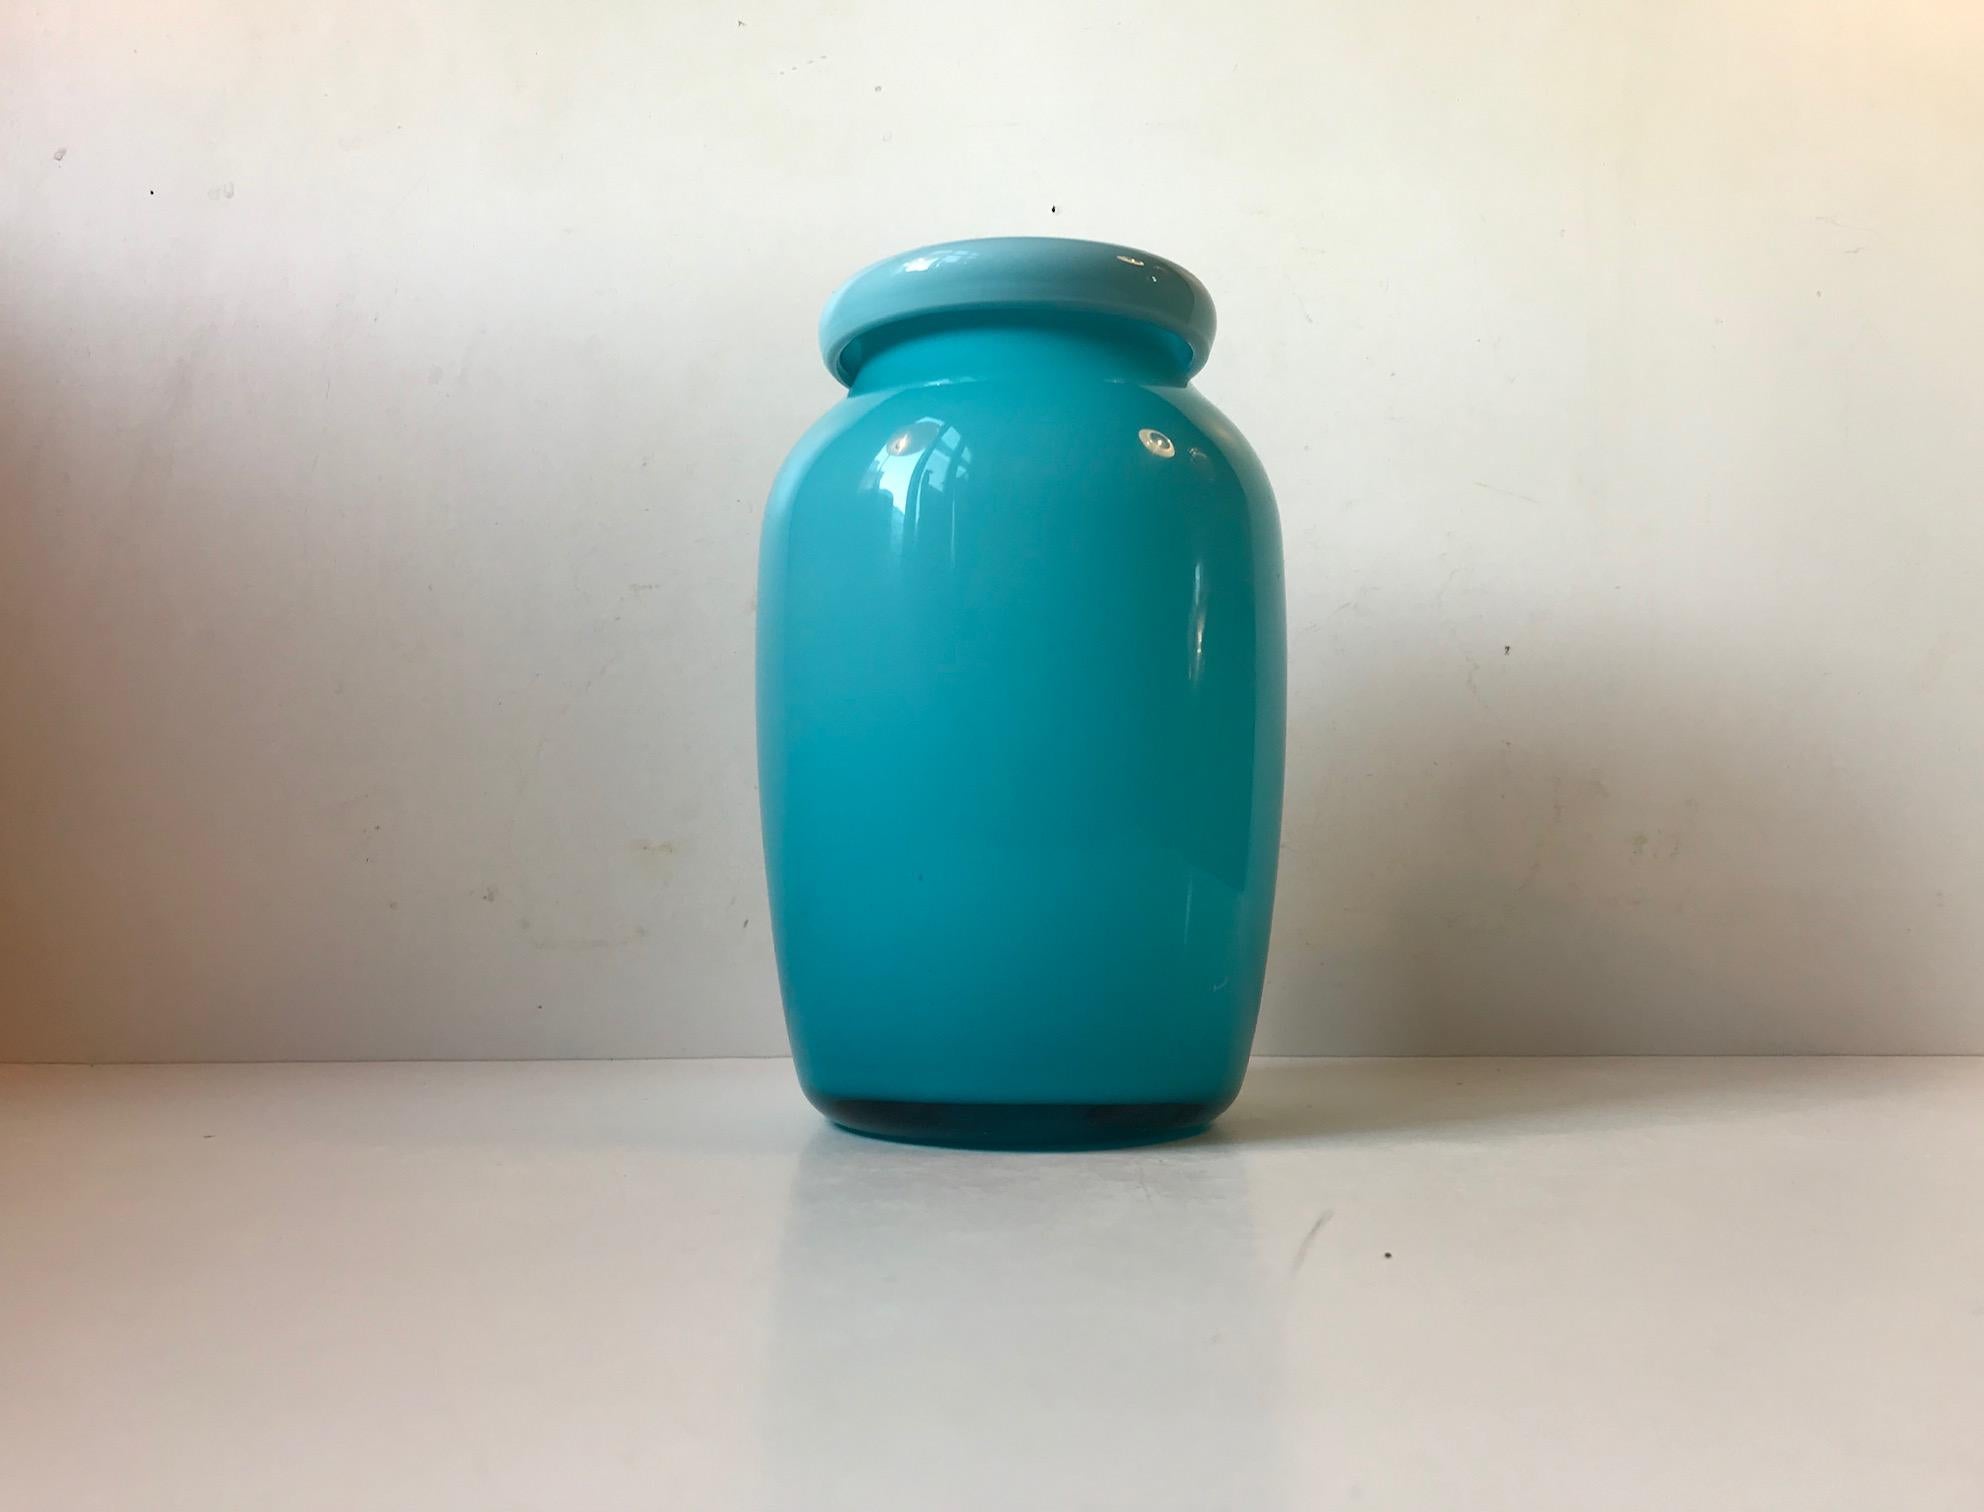 A rare baby-blue cased opaline glass vase by Michael Bang for Holmegaard, circa 1970. It is hand blown and features a folded collar. It is probably a piece-unique inspired by the 'Palet' series.